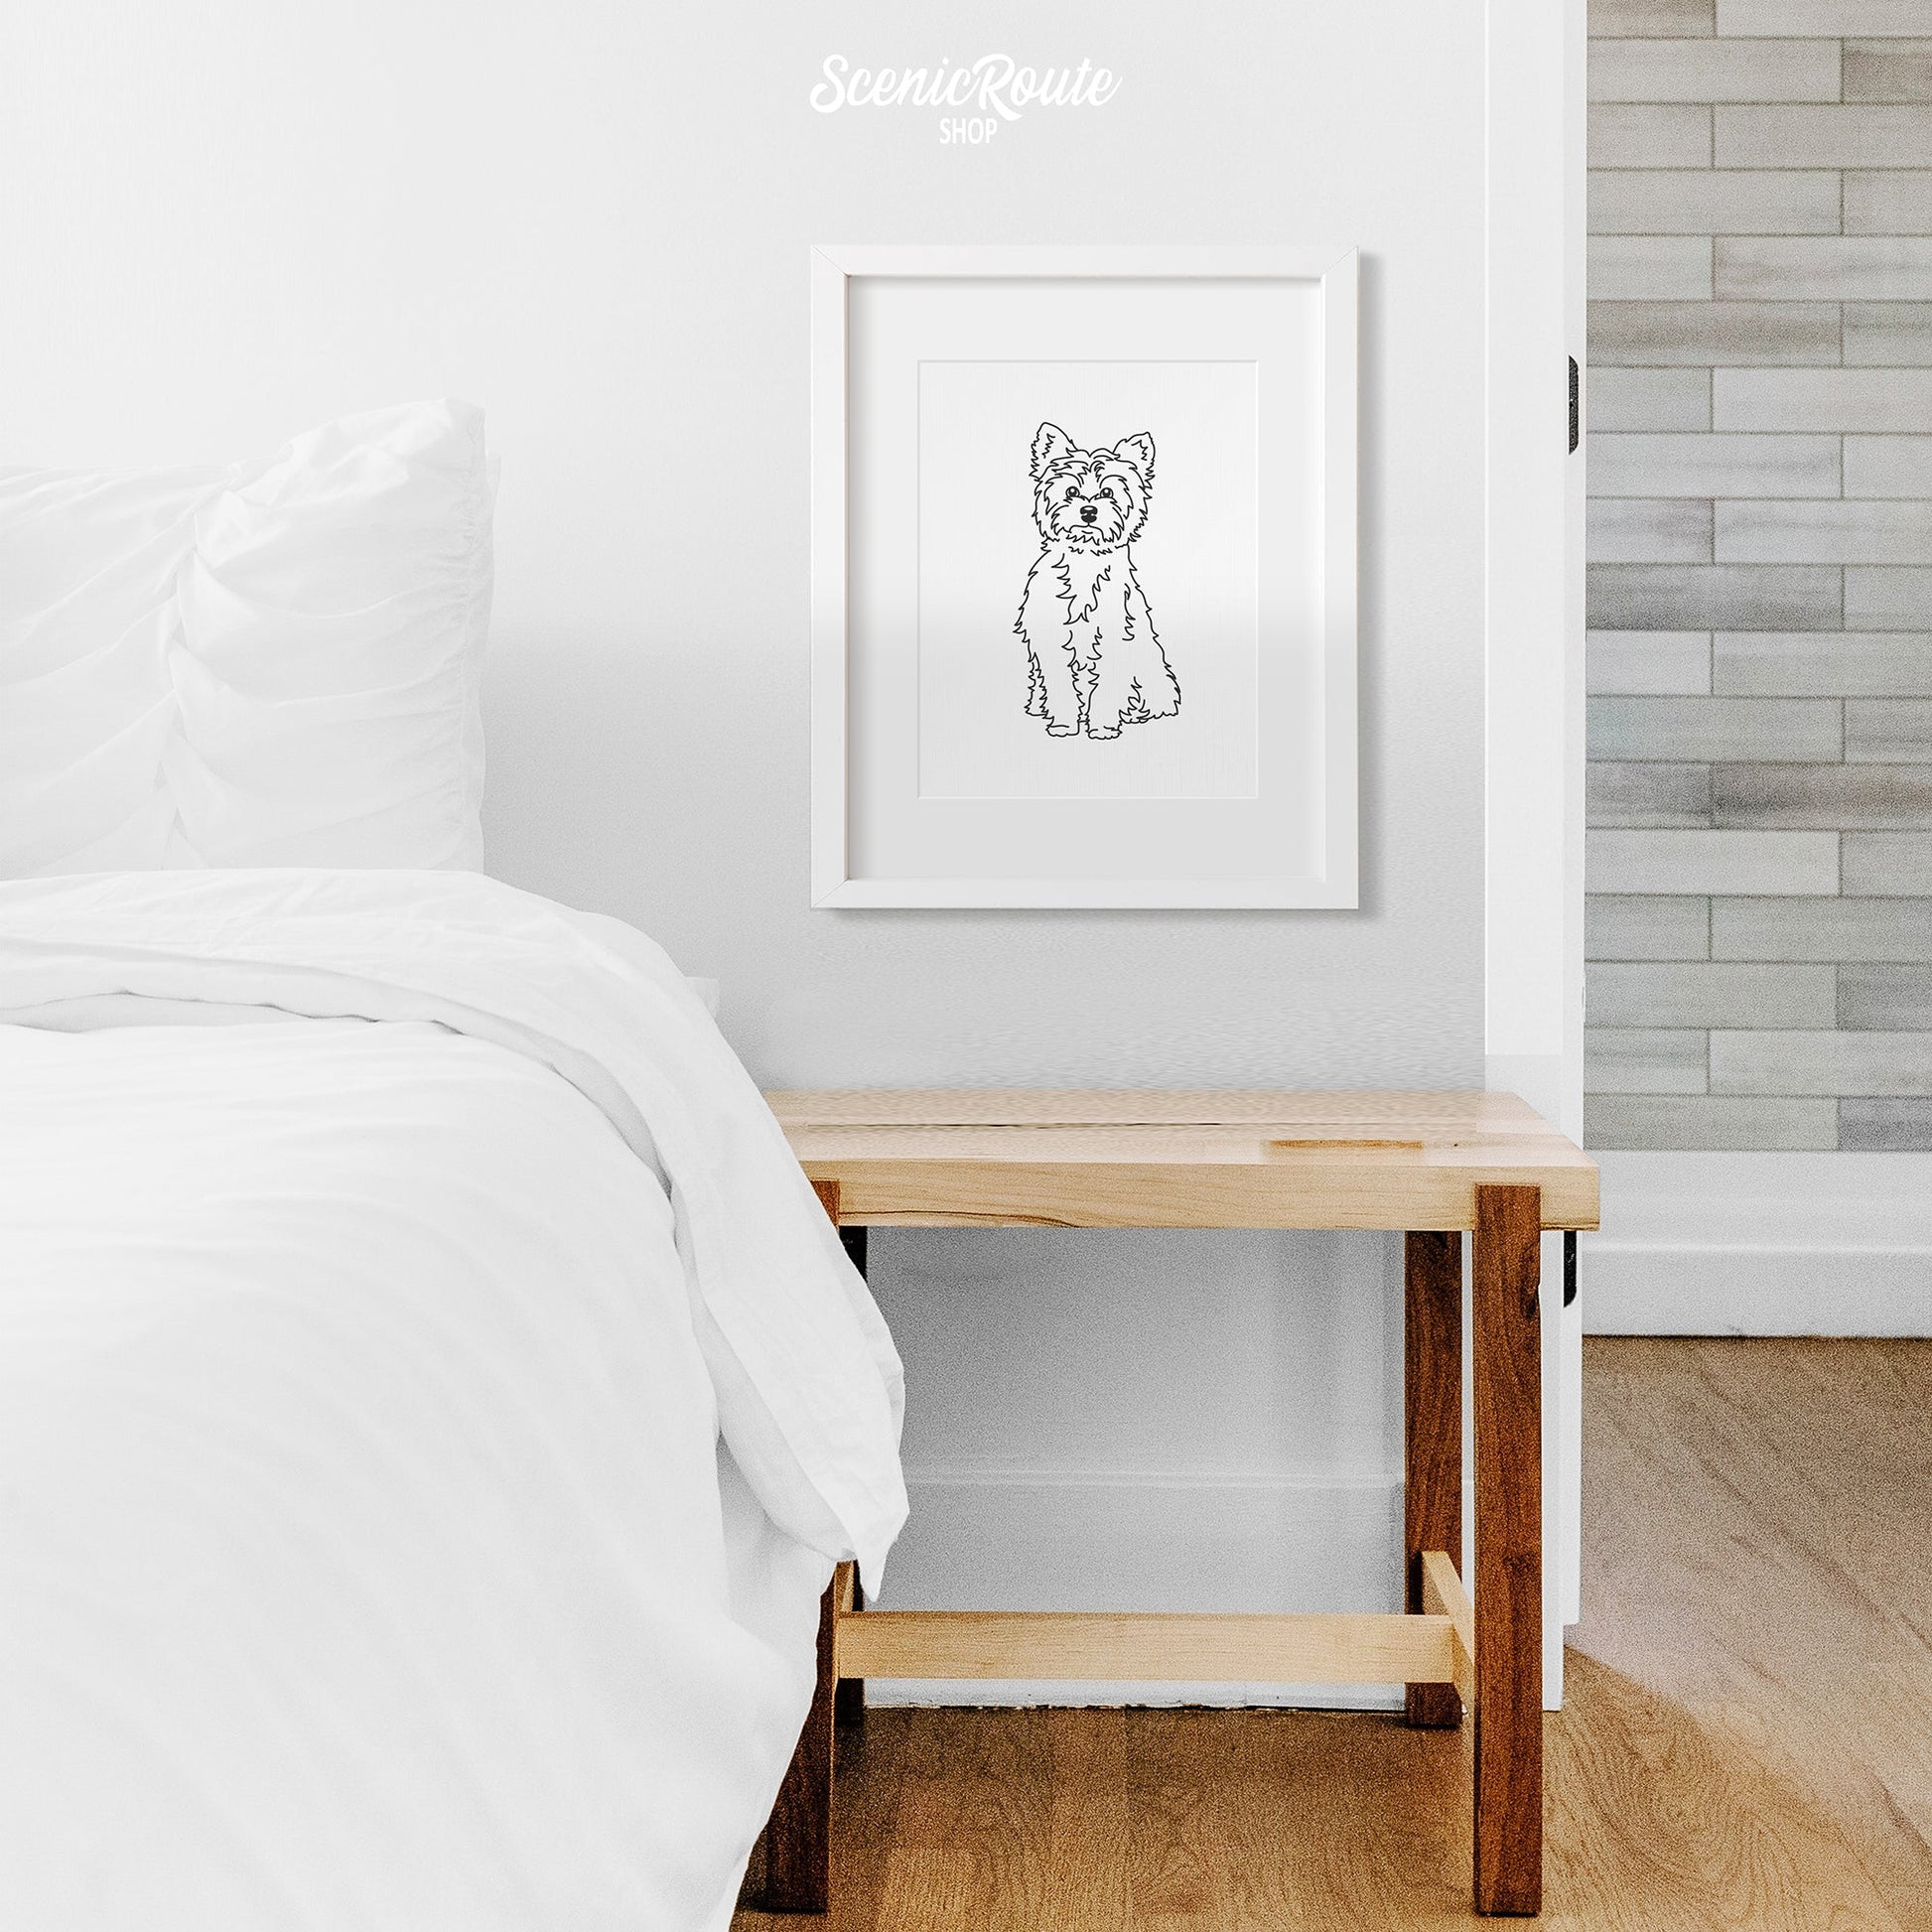 A framed line art drawing of a Yorkshire Terrier dog on a wall above a nightstand next to a bed